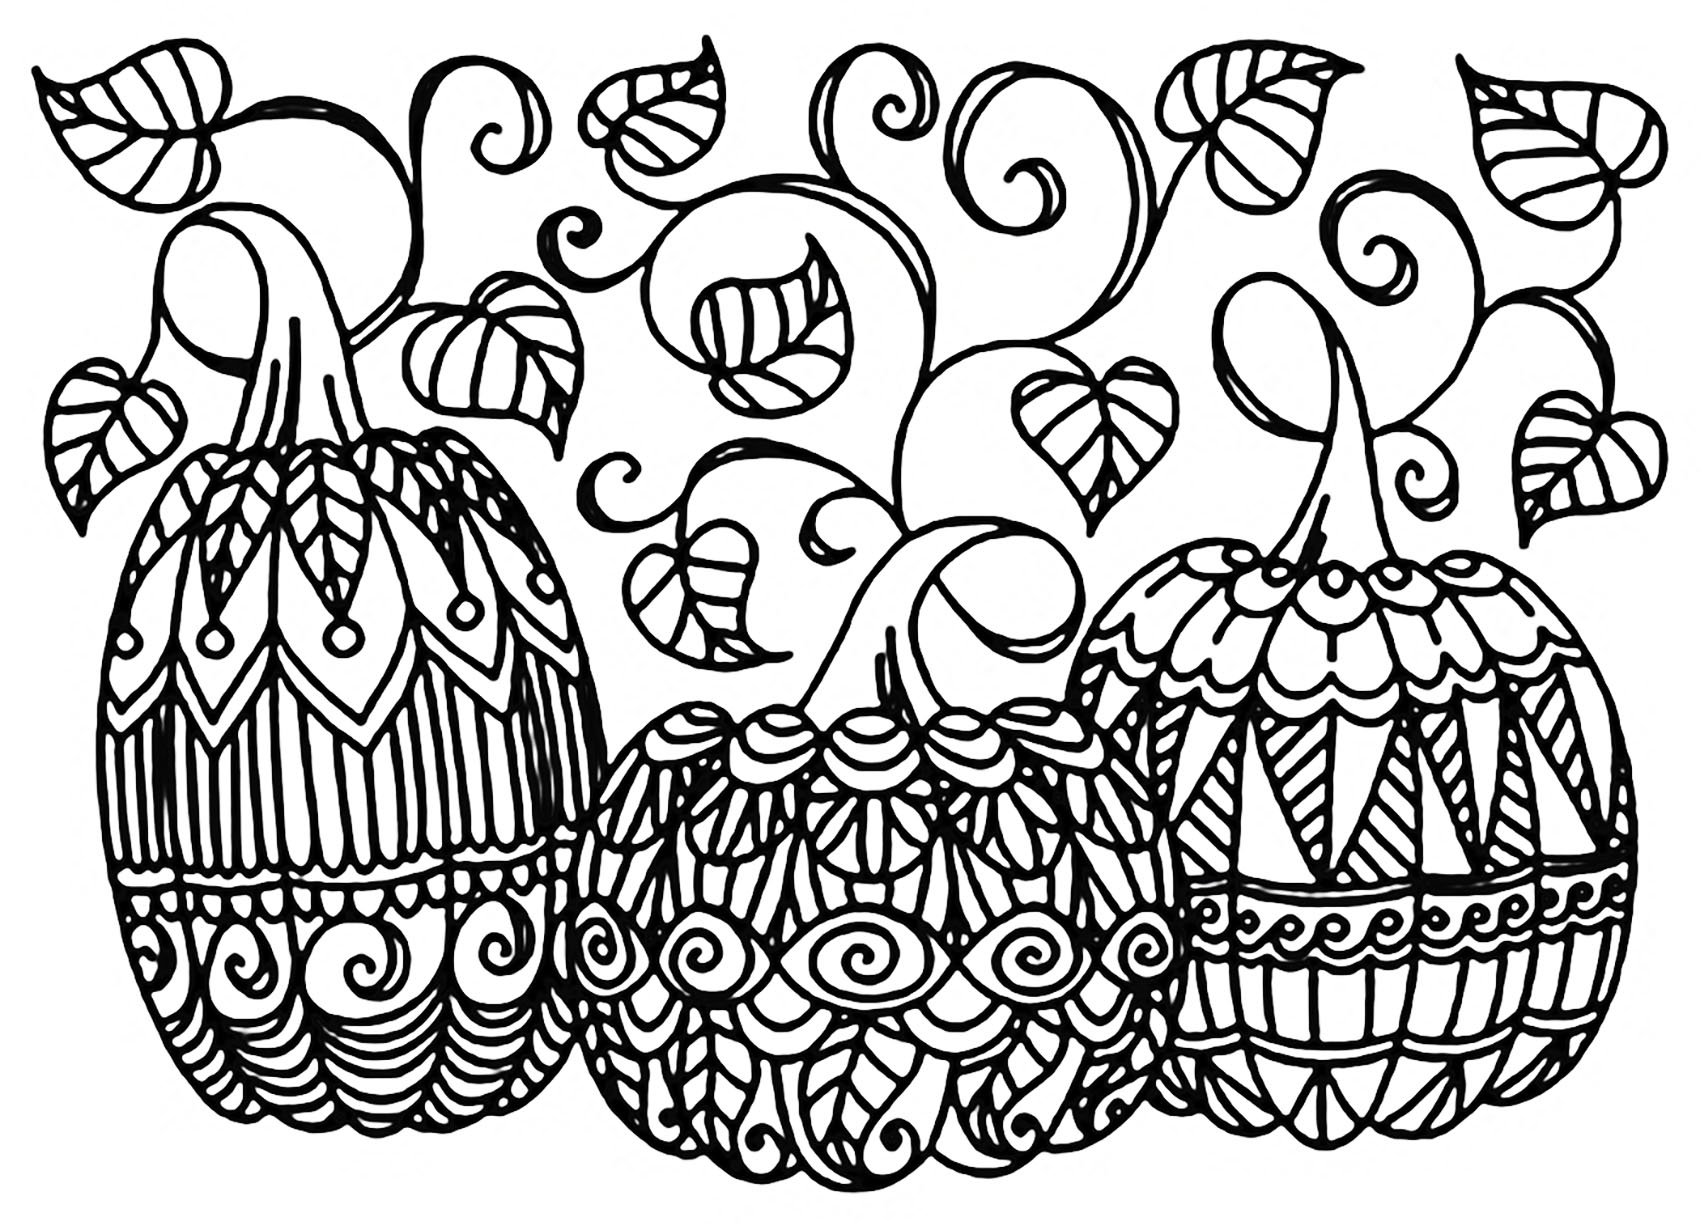 halloween-three-pumpkins-halloween-adult-coloring-pages